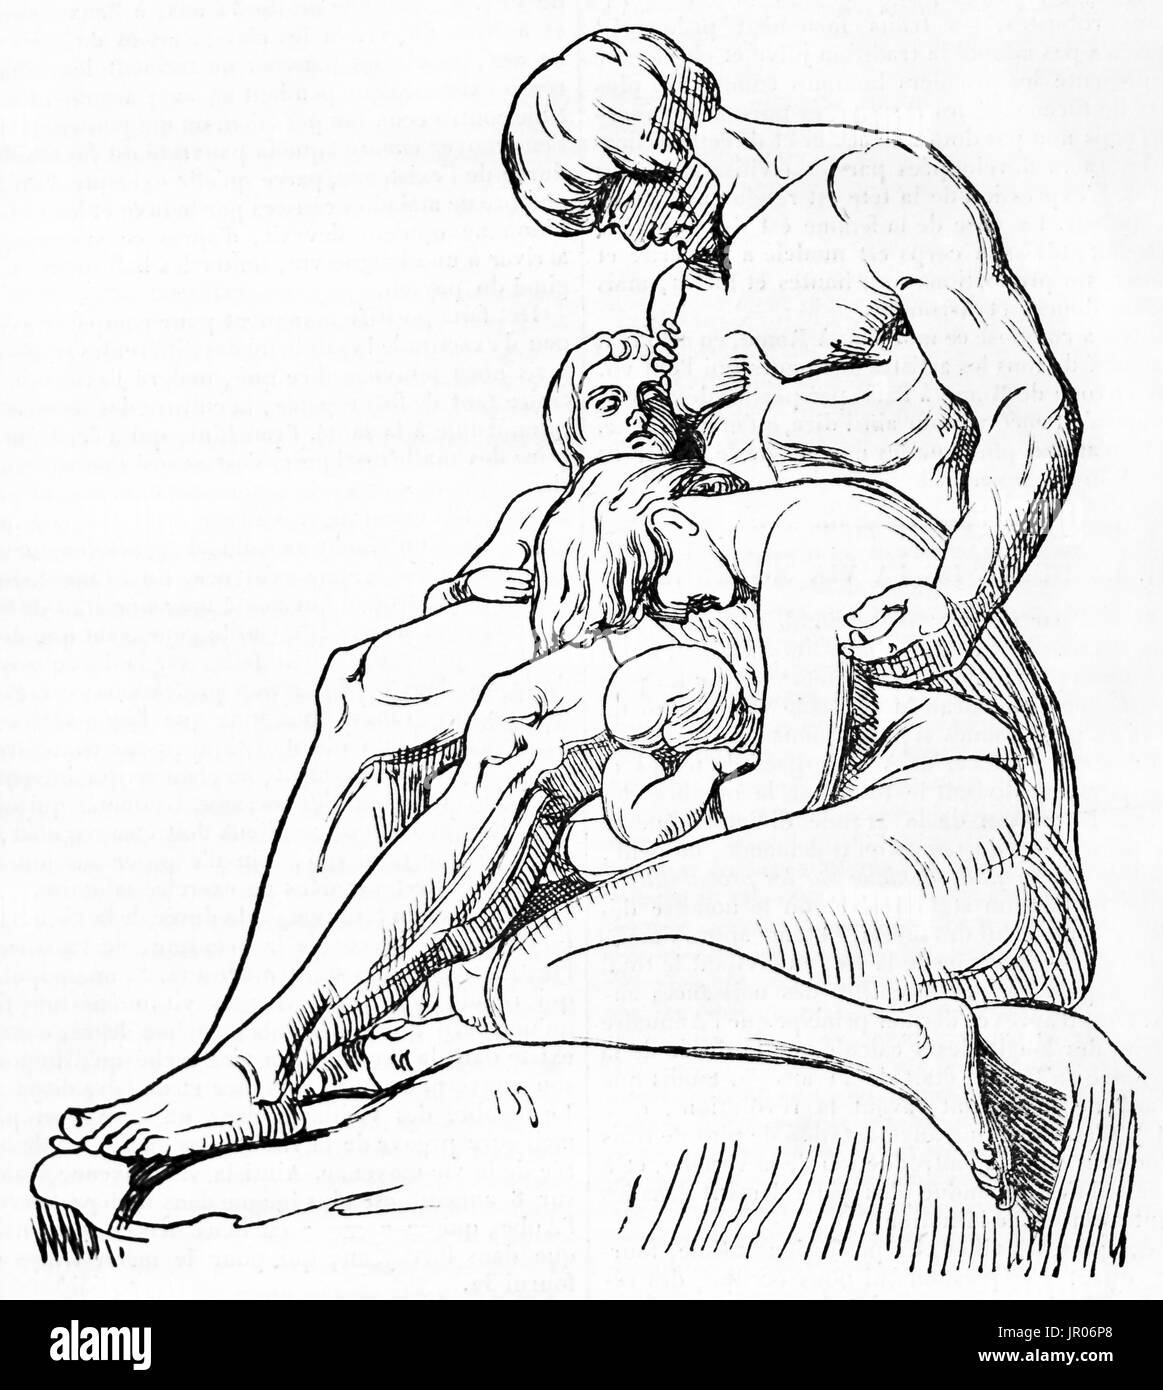 Cain and his family after the curse of God. Created by Etex, published on Magasin Pittoresque, 1833. Stock Photo